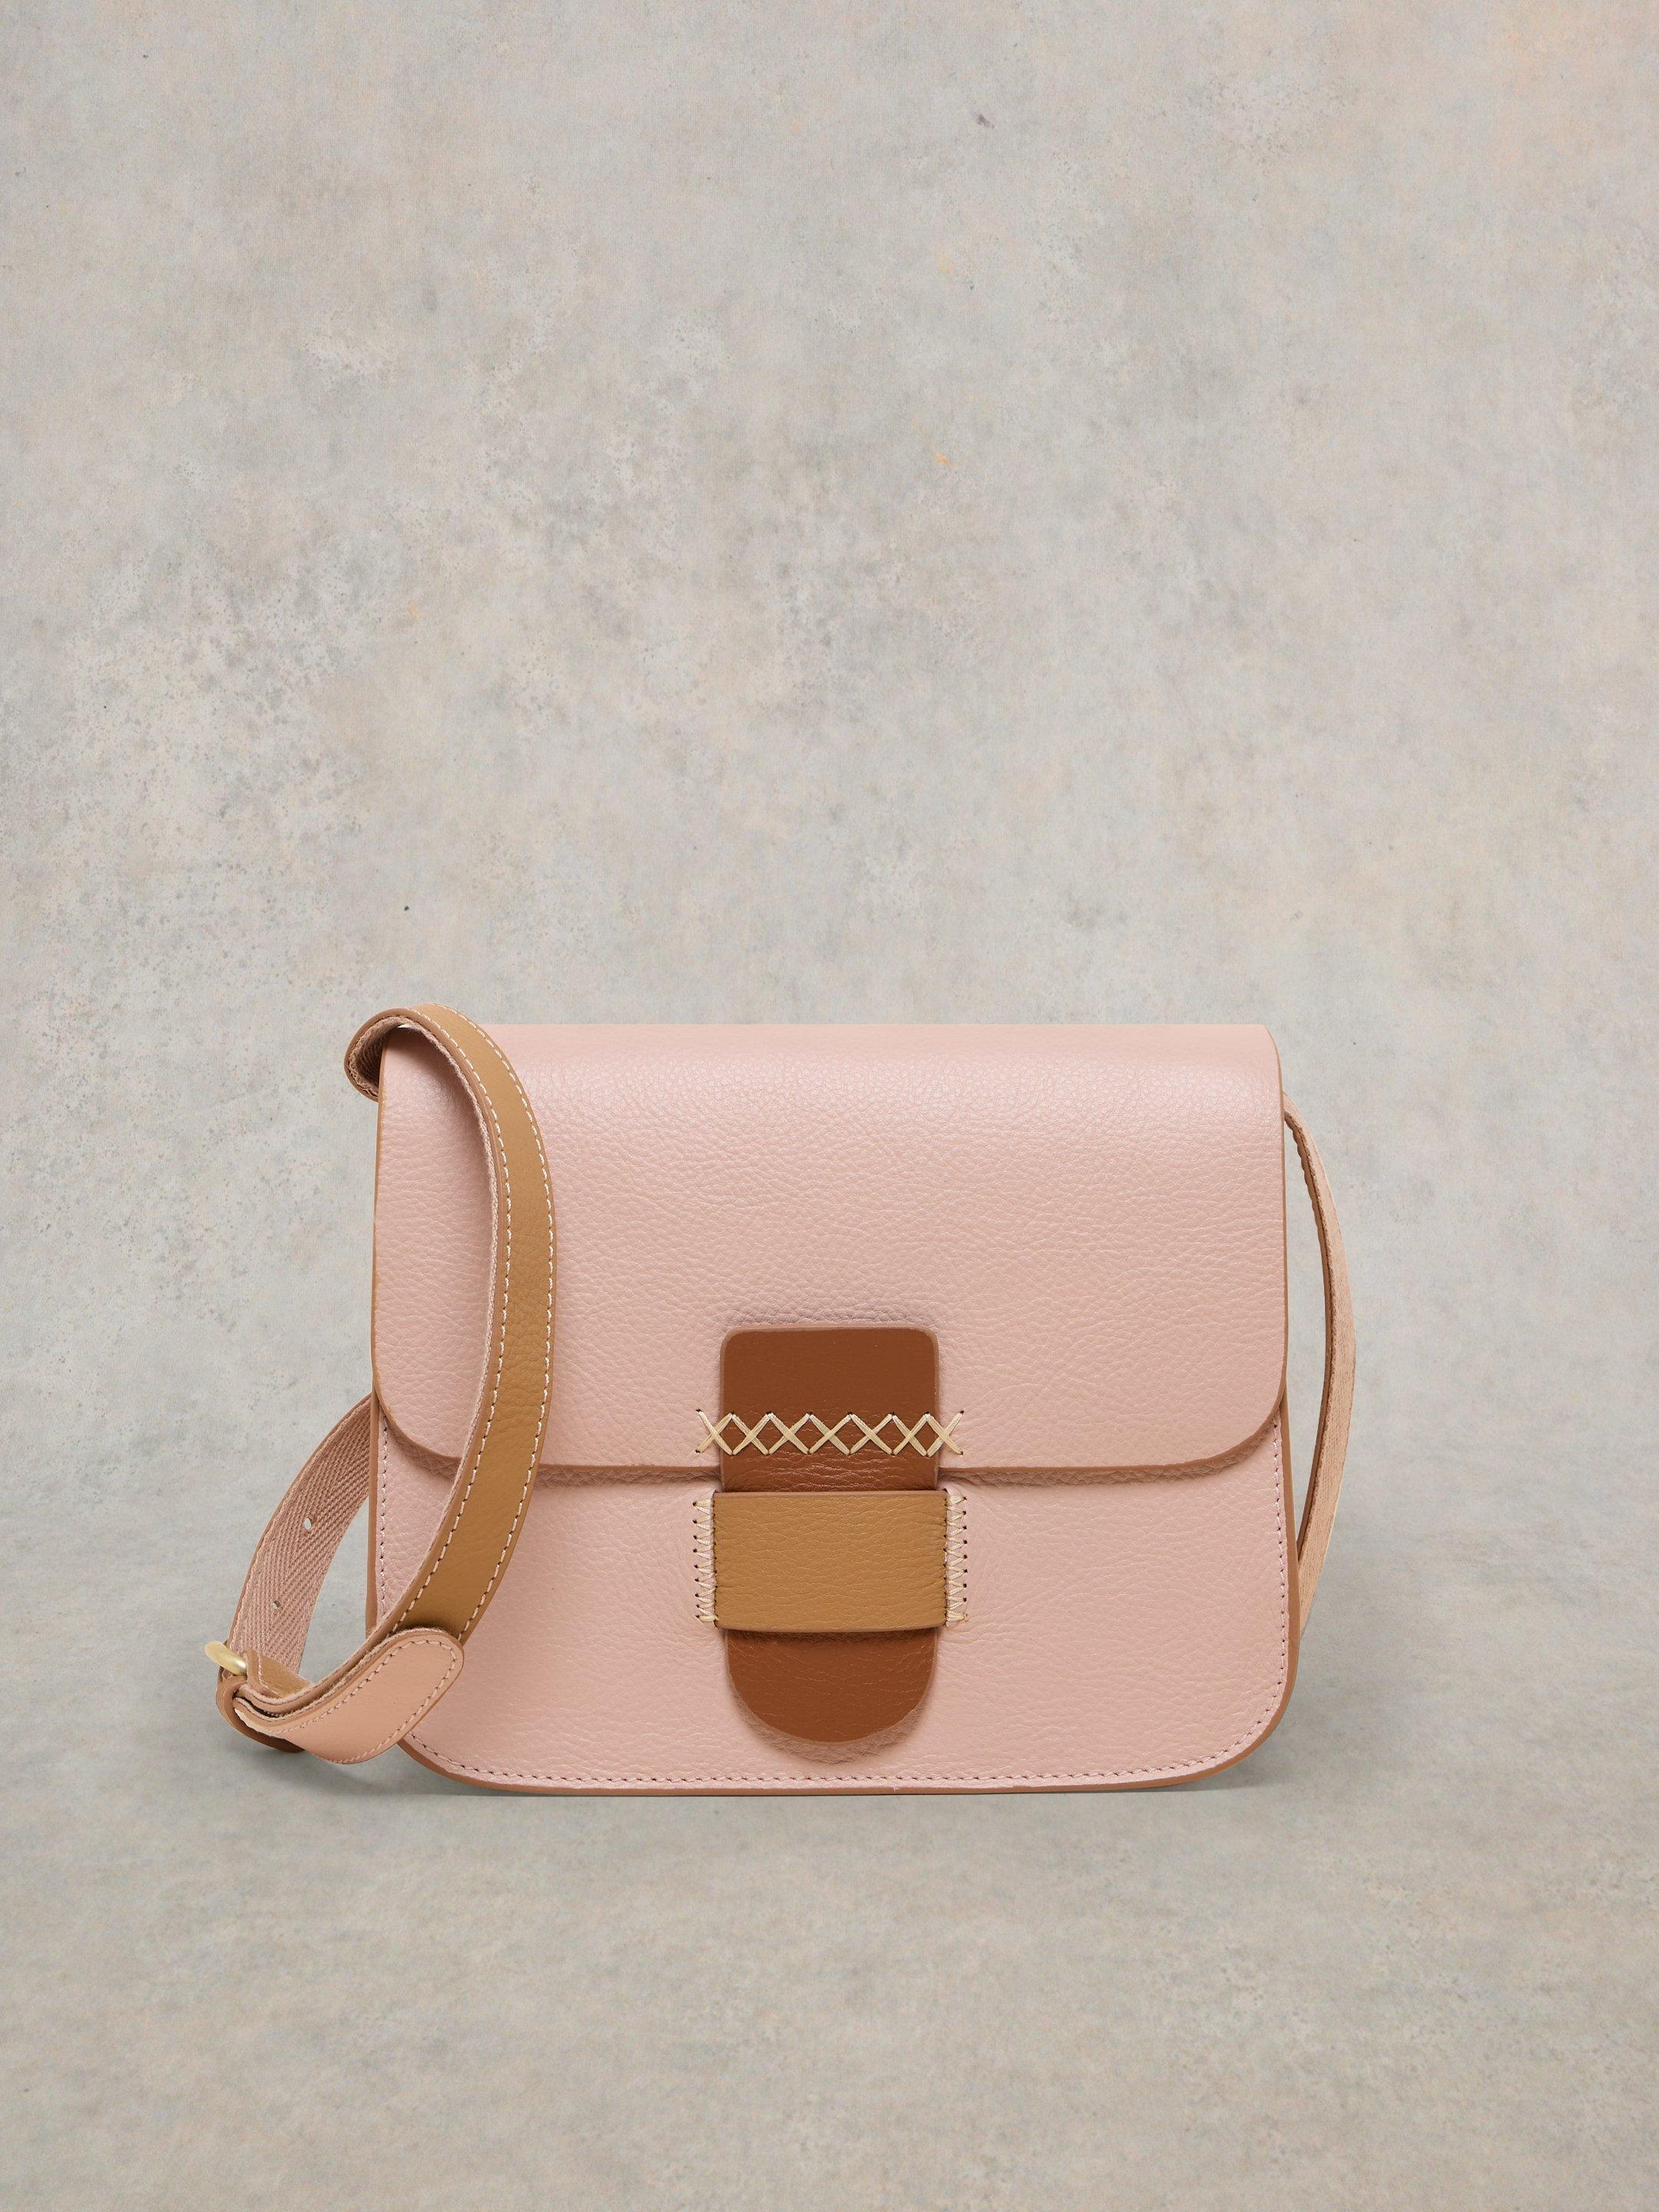 Evie Leather Satchel in LGT PINK - LIFESTYLE